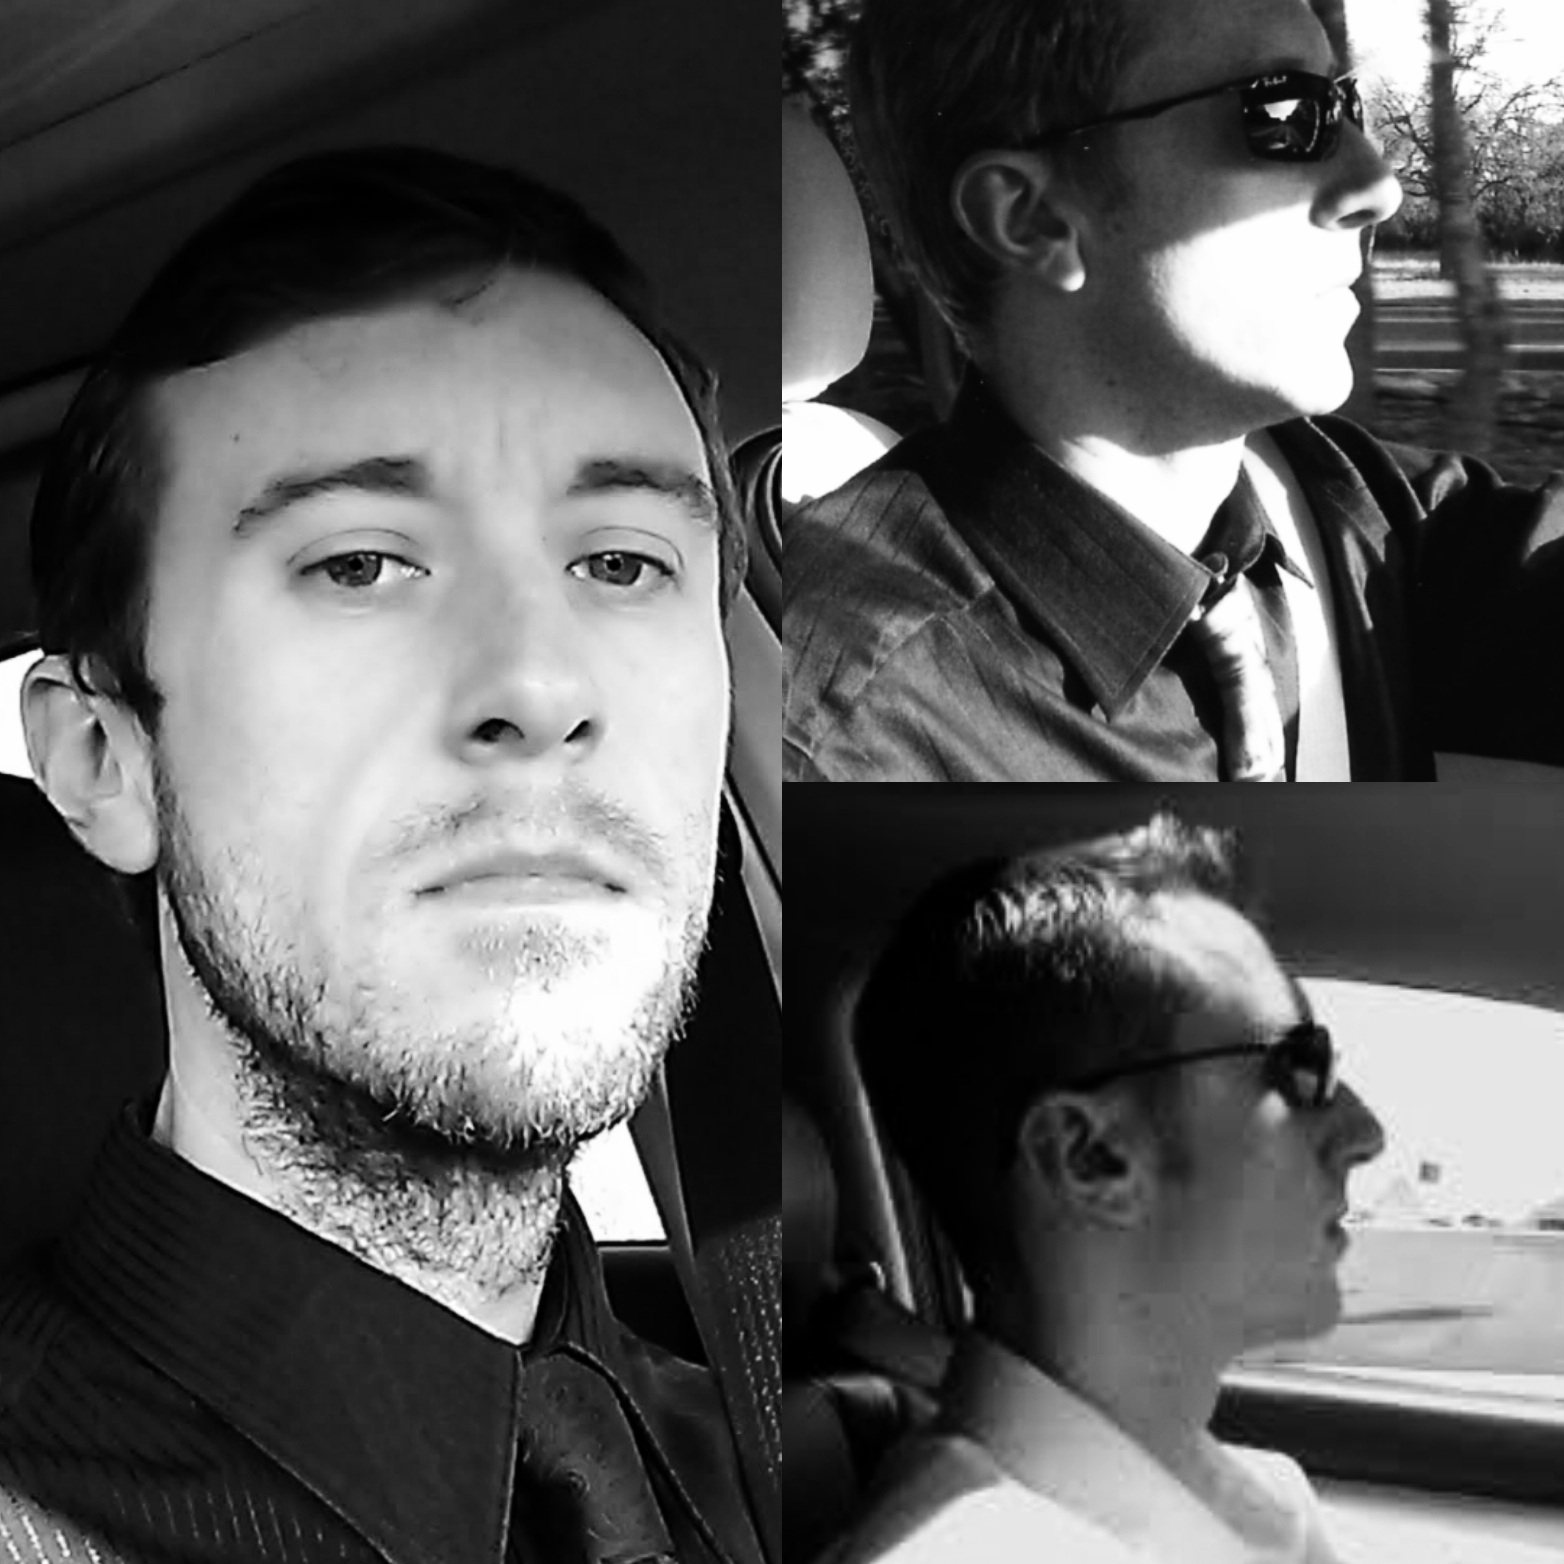 Michael "MJ The Terrible" Johnson Black and White Driving Photos Collage